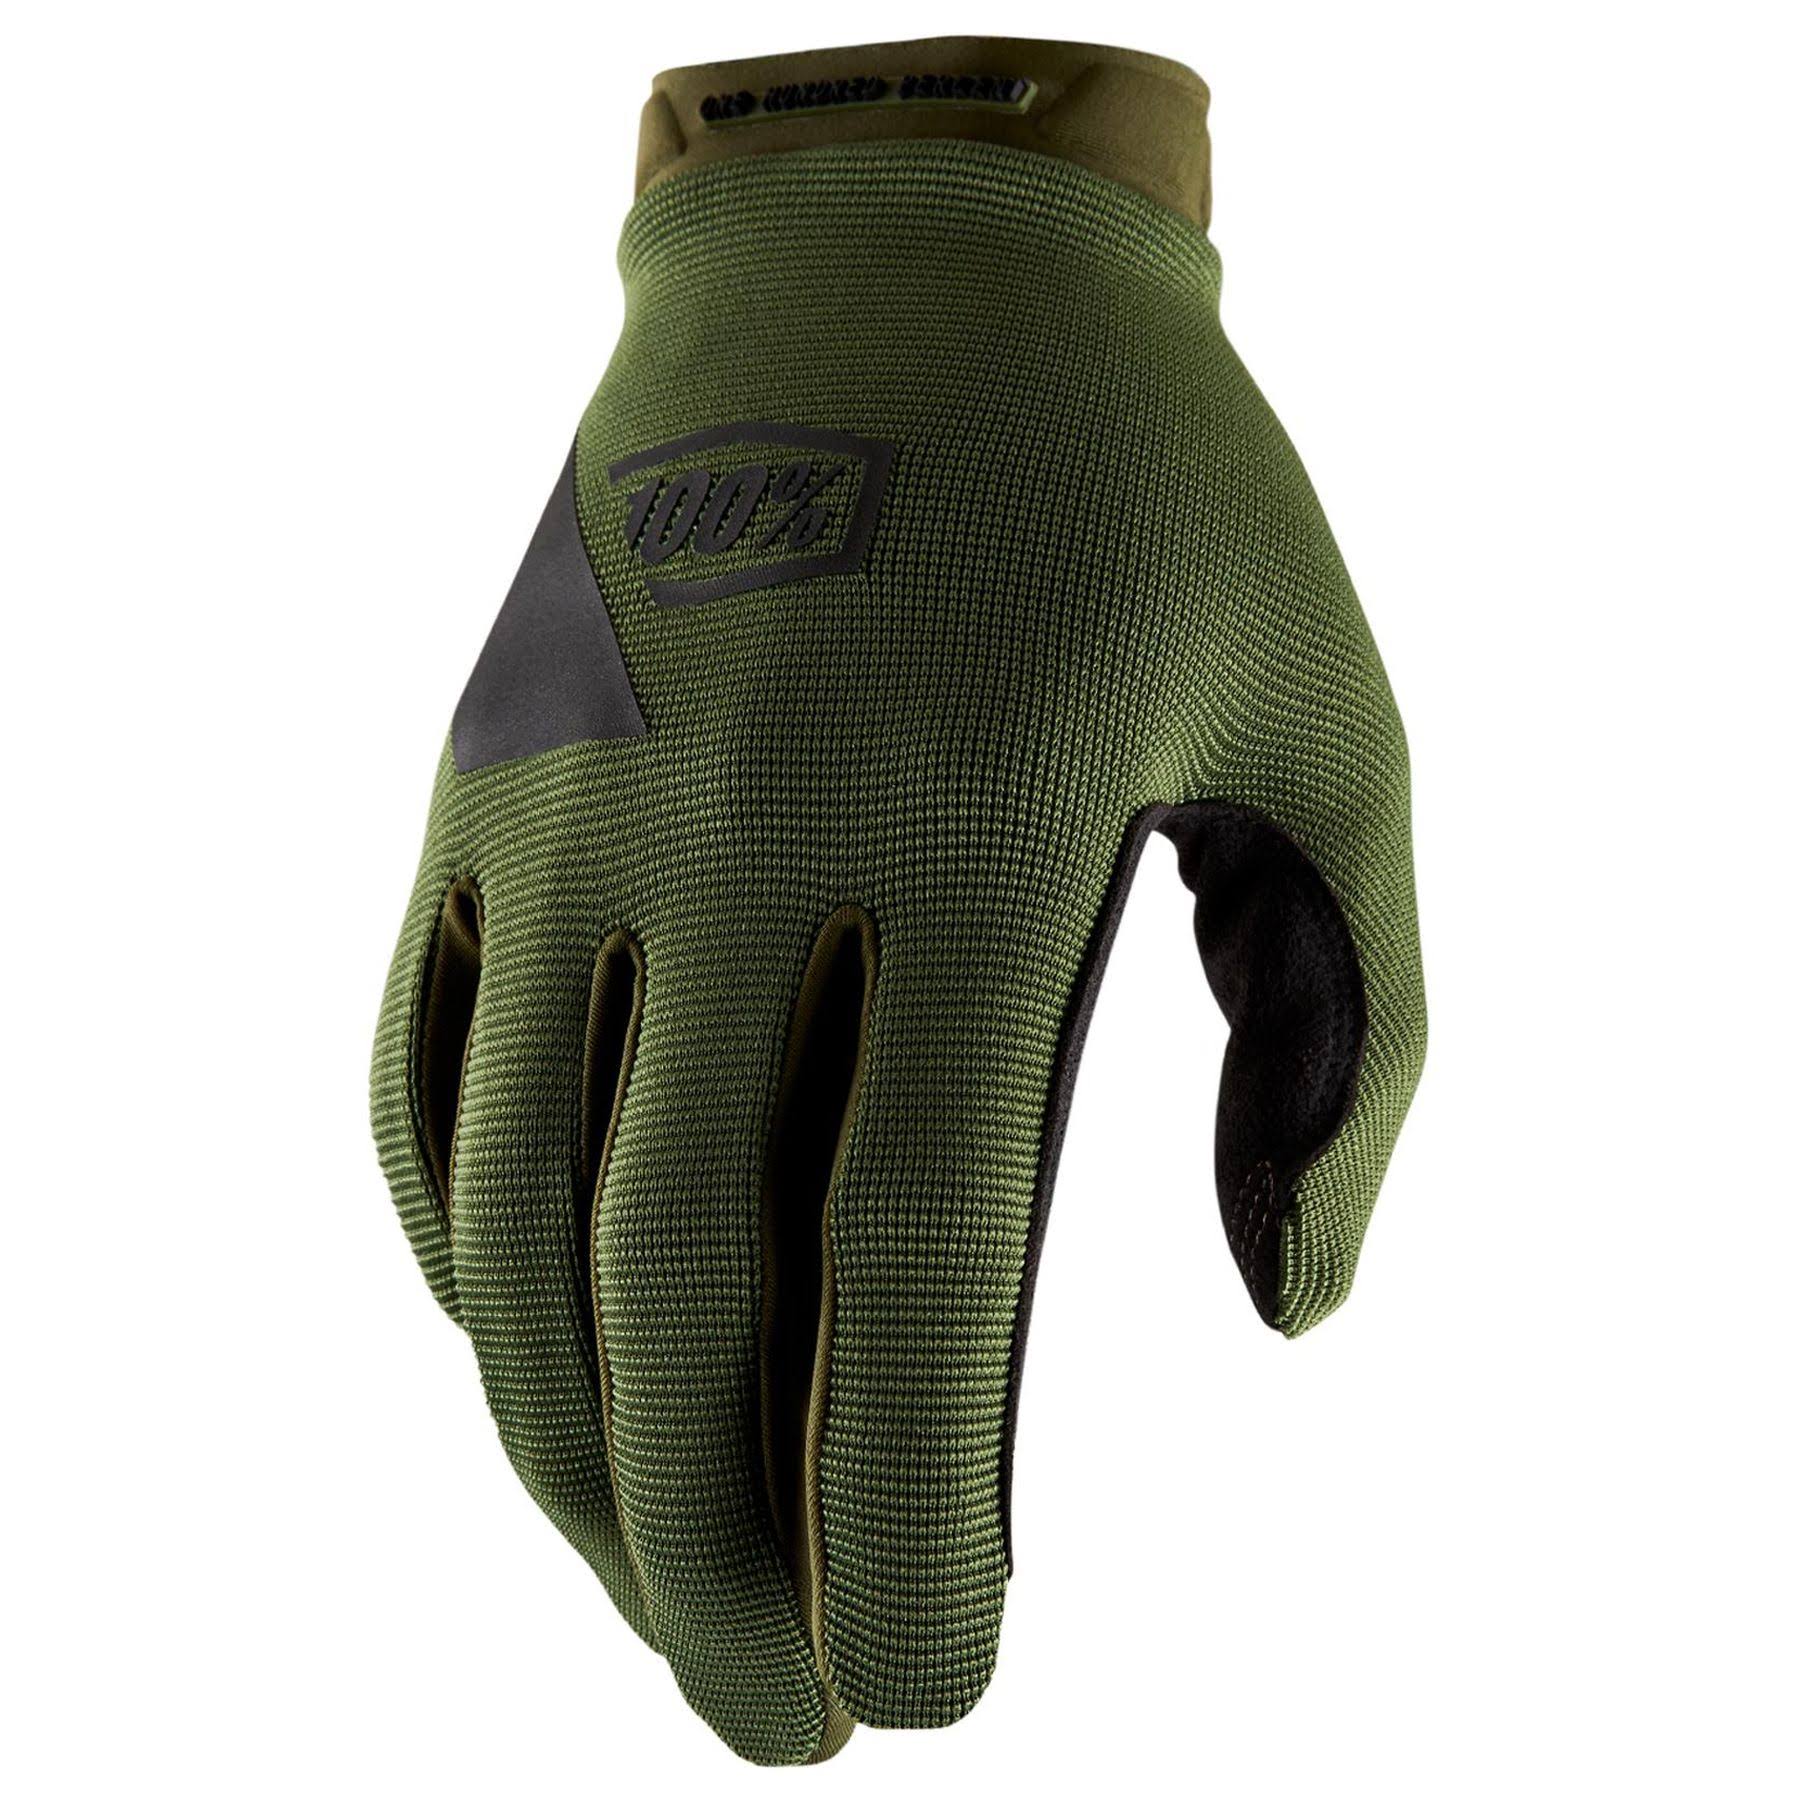 100% Cycling Full Finger Gloves - Fatigue, Large